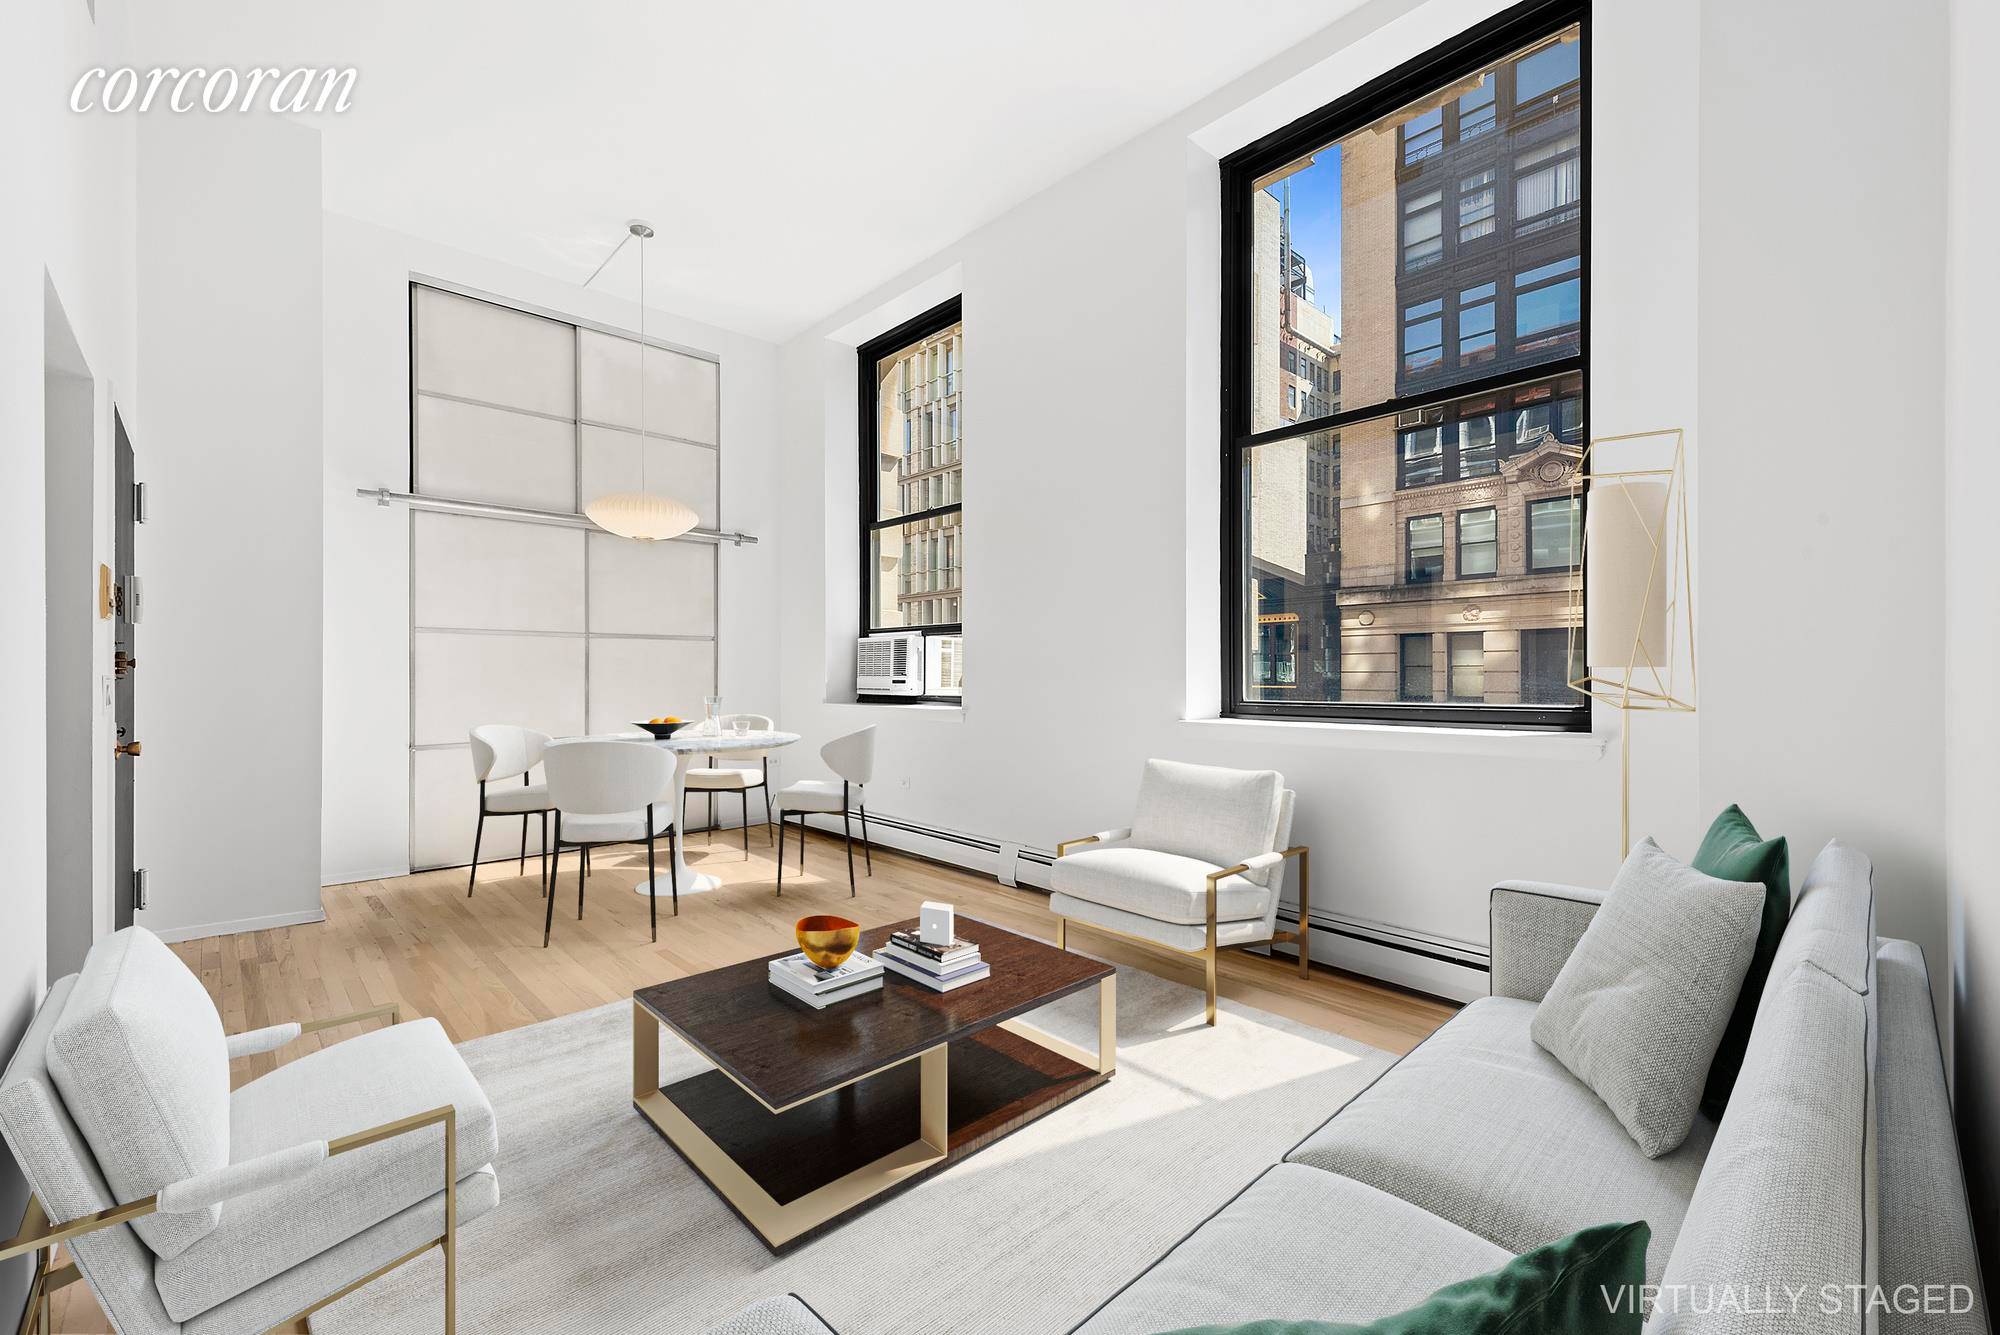 Lofty Living awaits you in the heart of Greenwich Village at 250 Mercer Street D301.